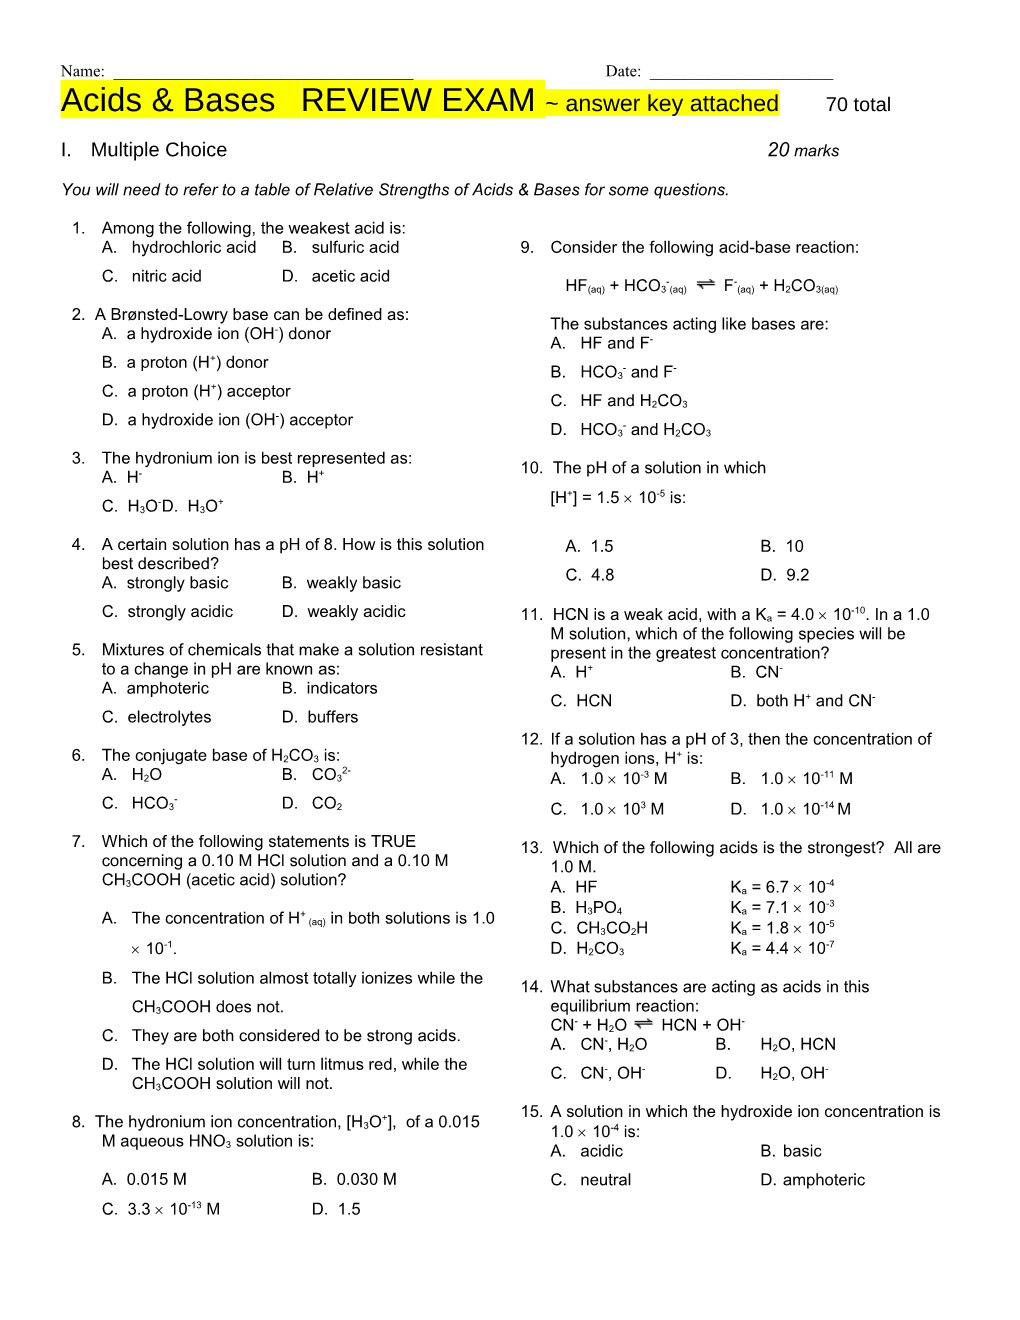 Acids & Bases REVIEW EXAM Answer Key Attached 70 Total